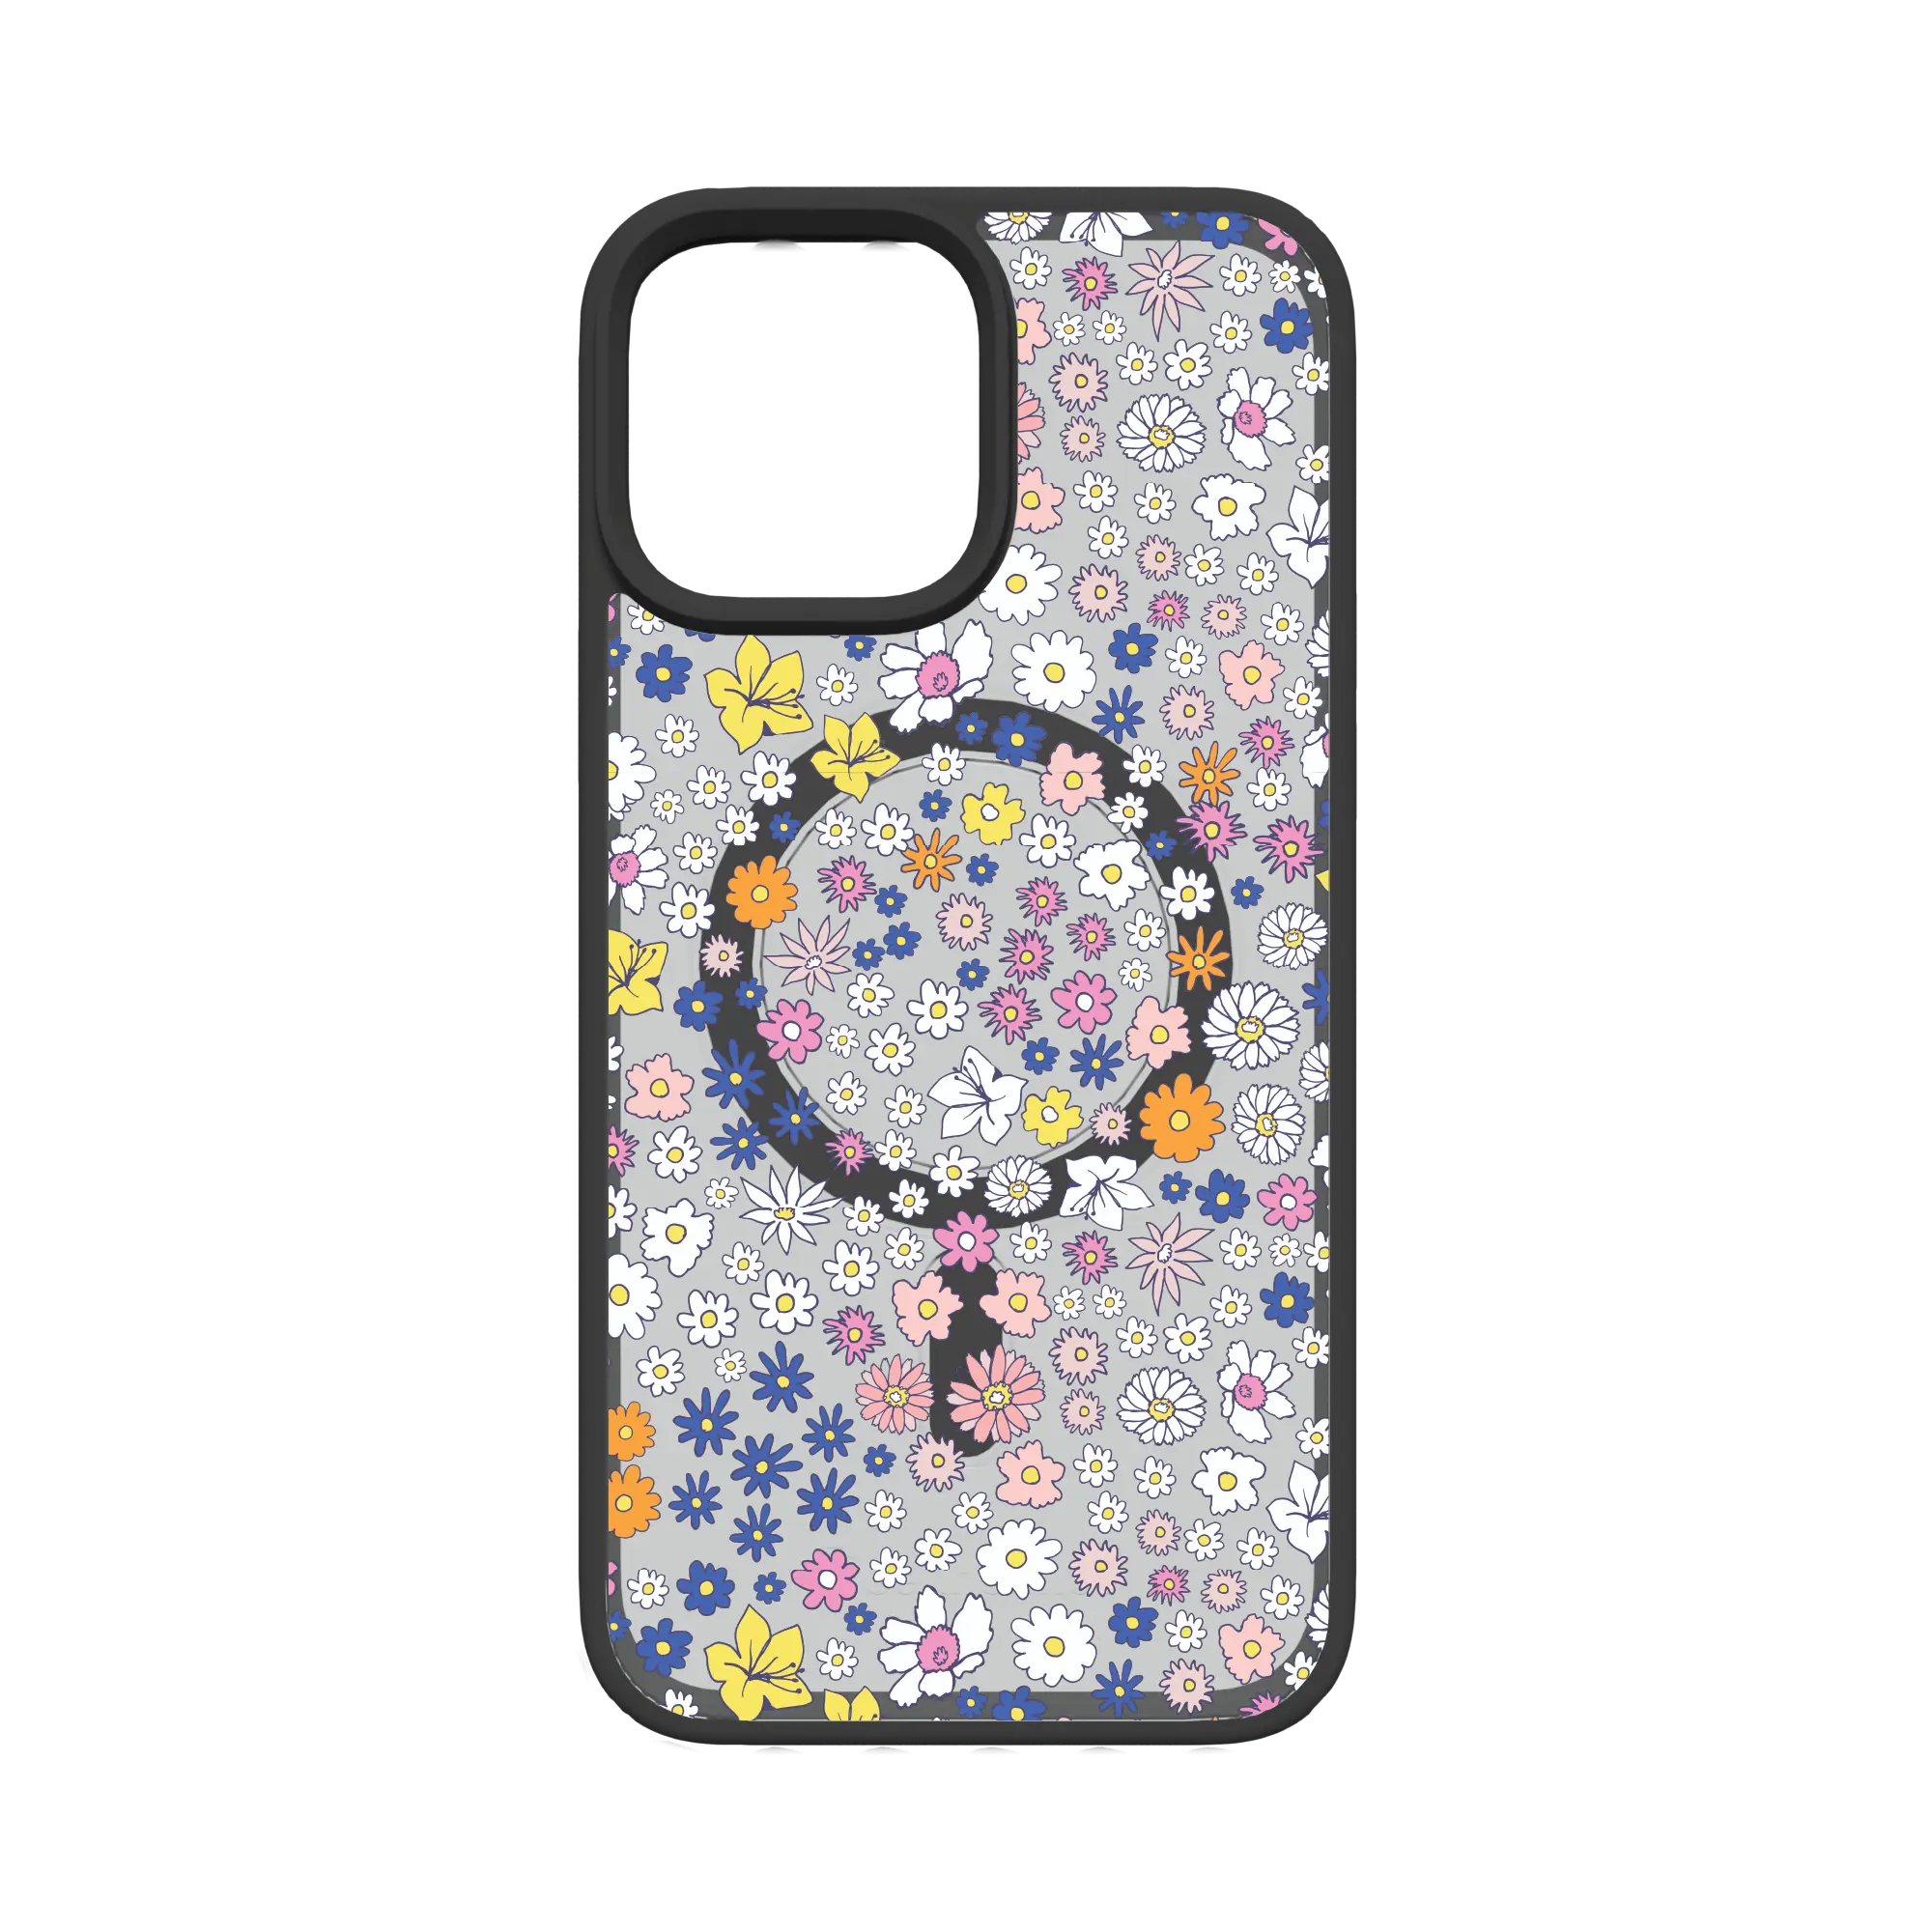 Apple-iPhone-12-Pro-Max-Crystal-Clear Wild Blossom | Protective MagSafe Case | Flower Series for Apple iPhone 12 Series cellhelmet cellhelmet